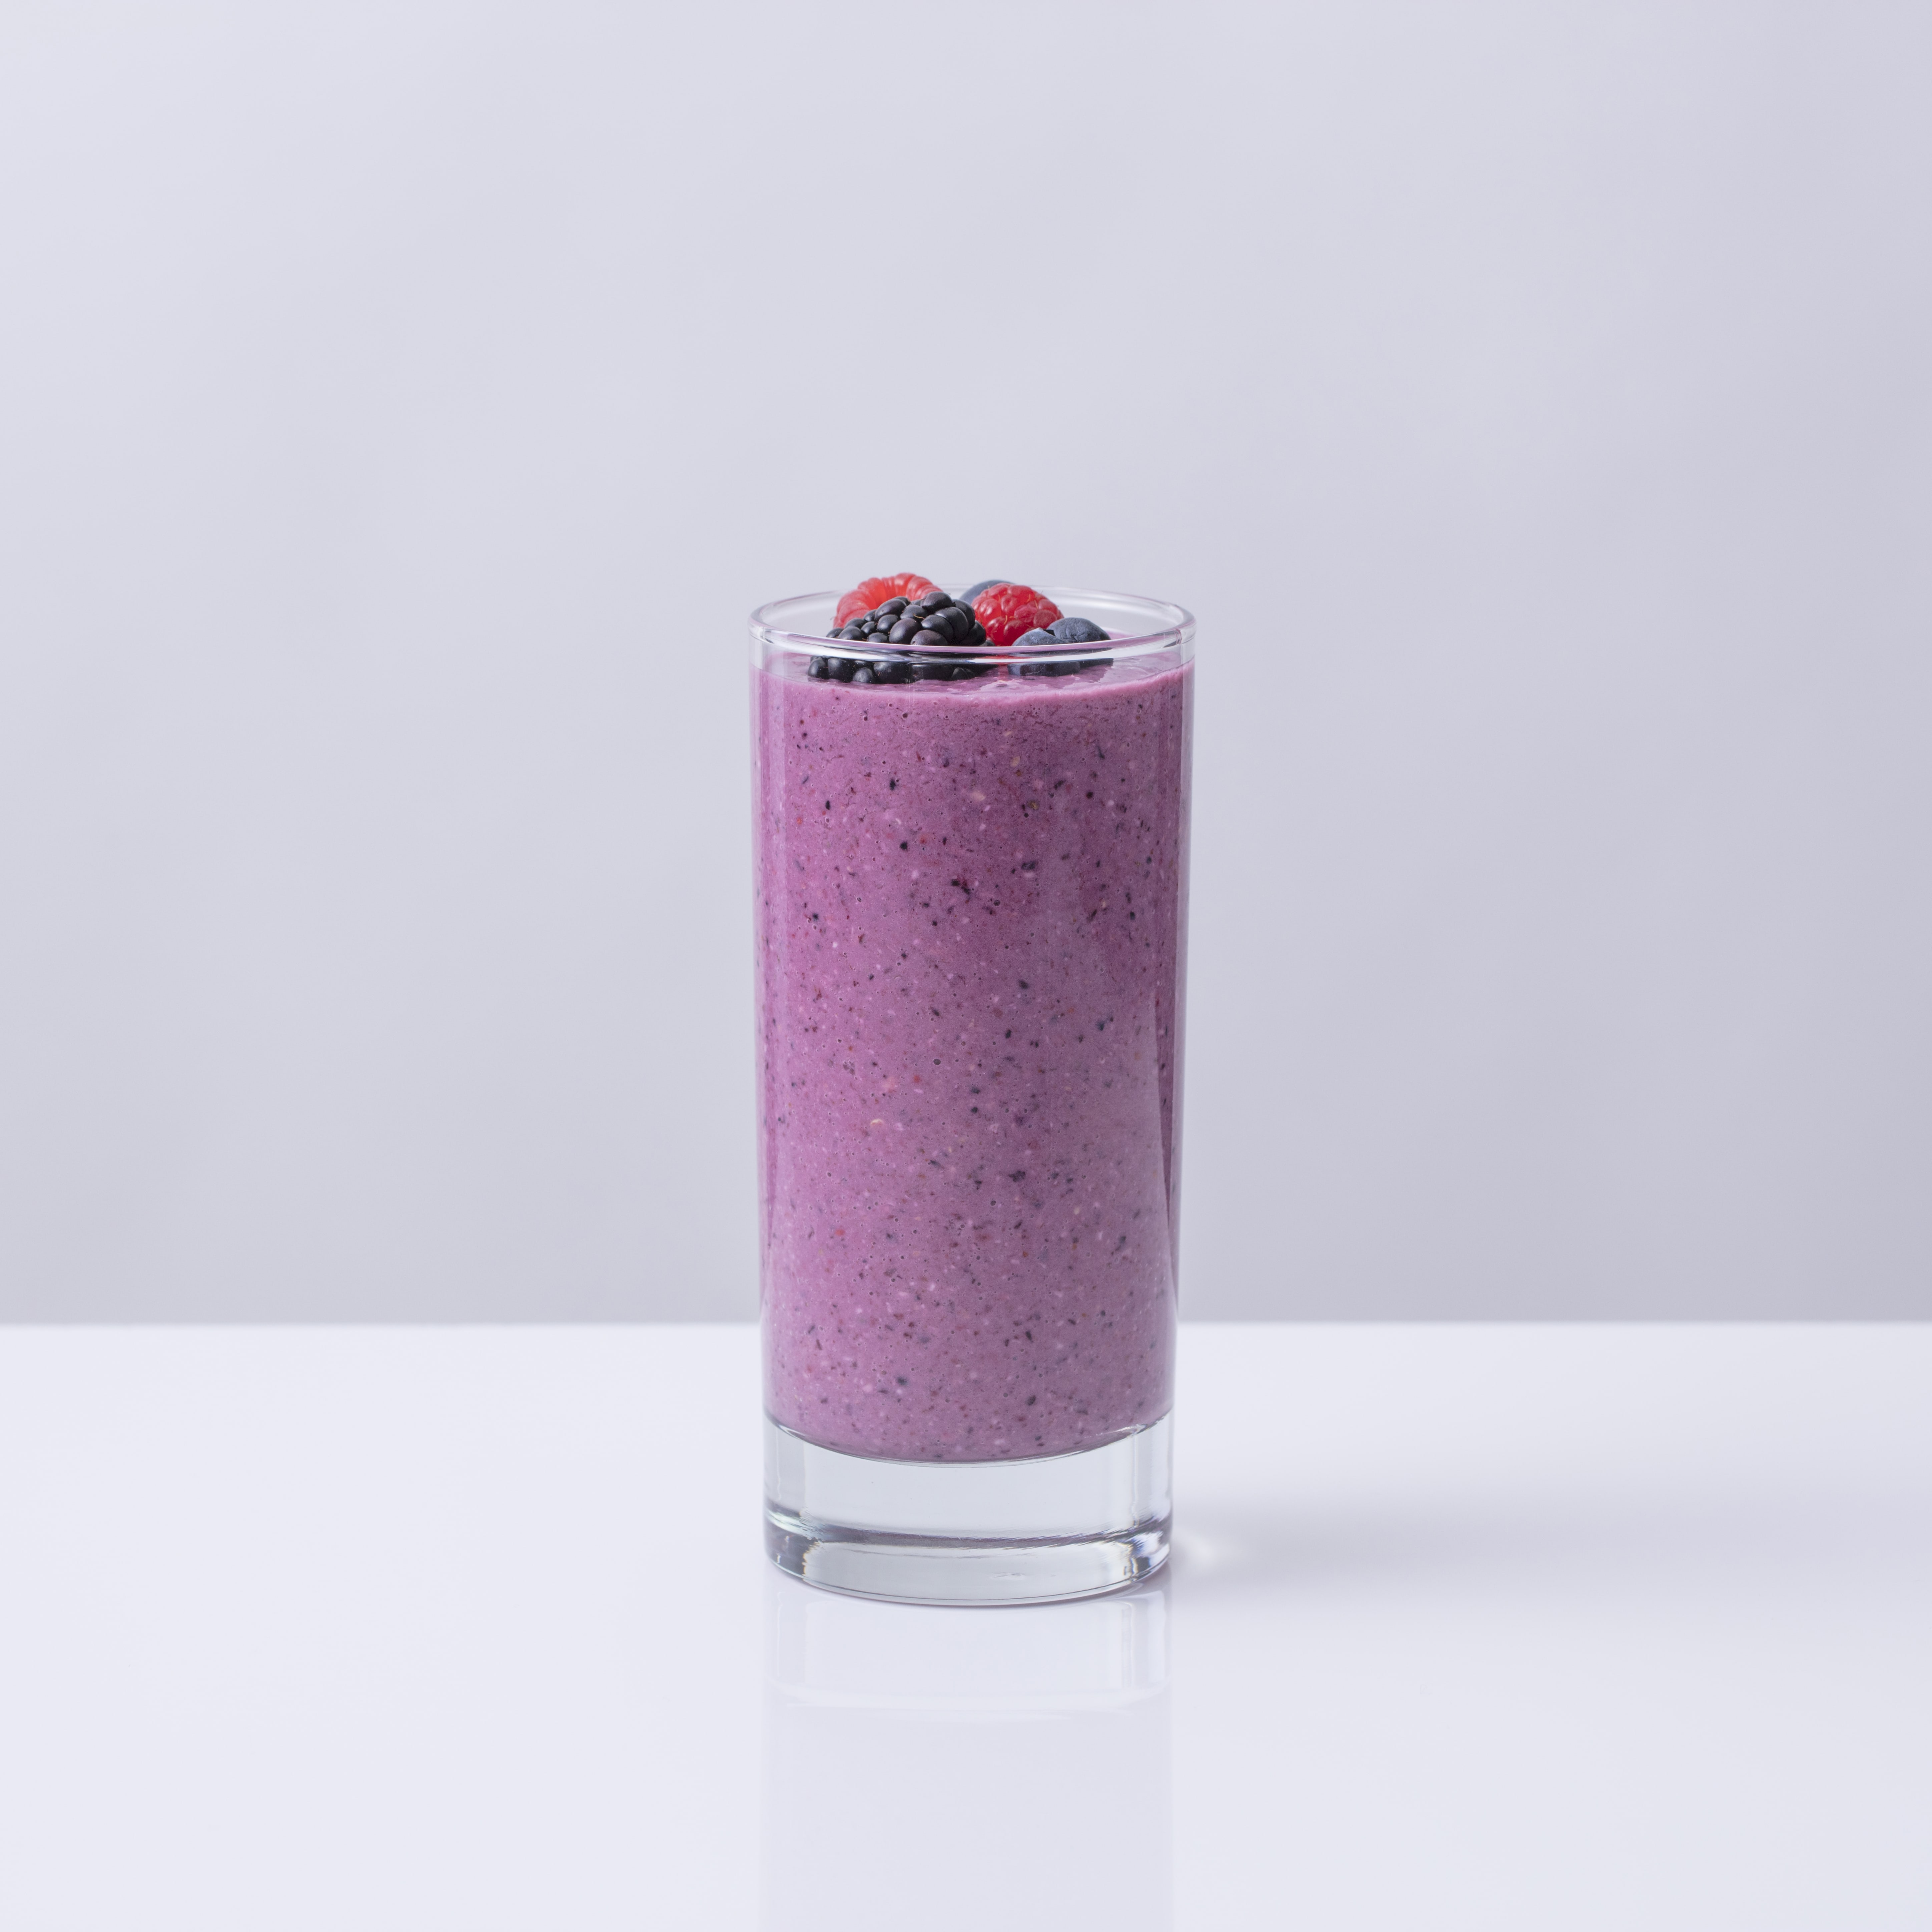 Ginger-Berry Oat Smoothie